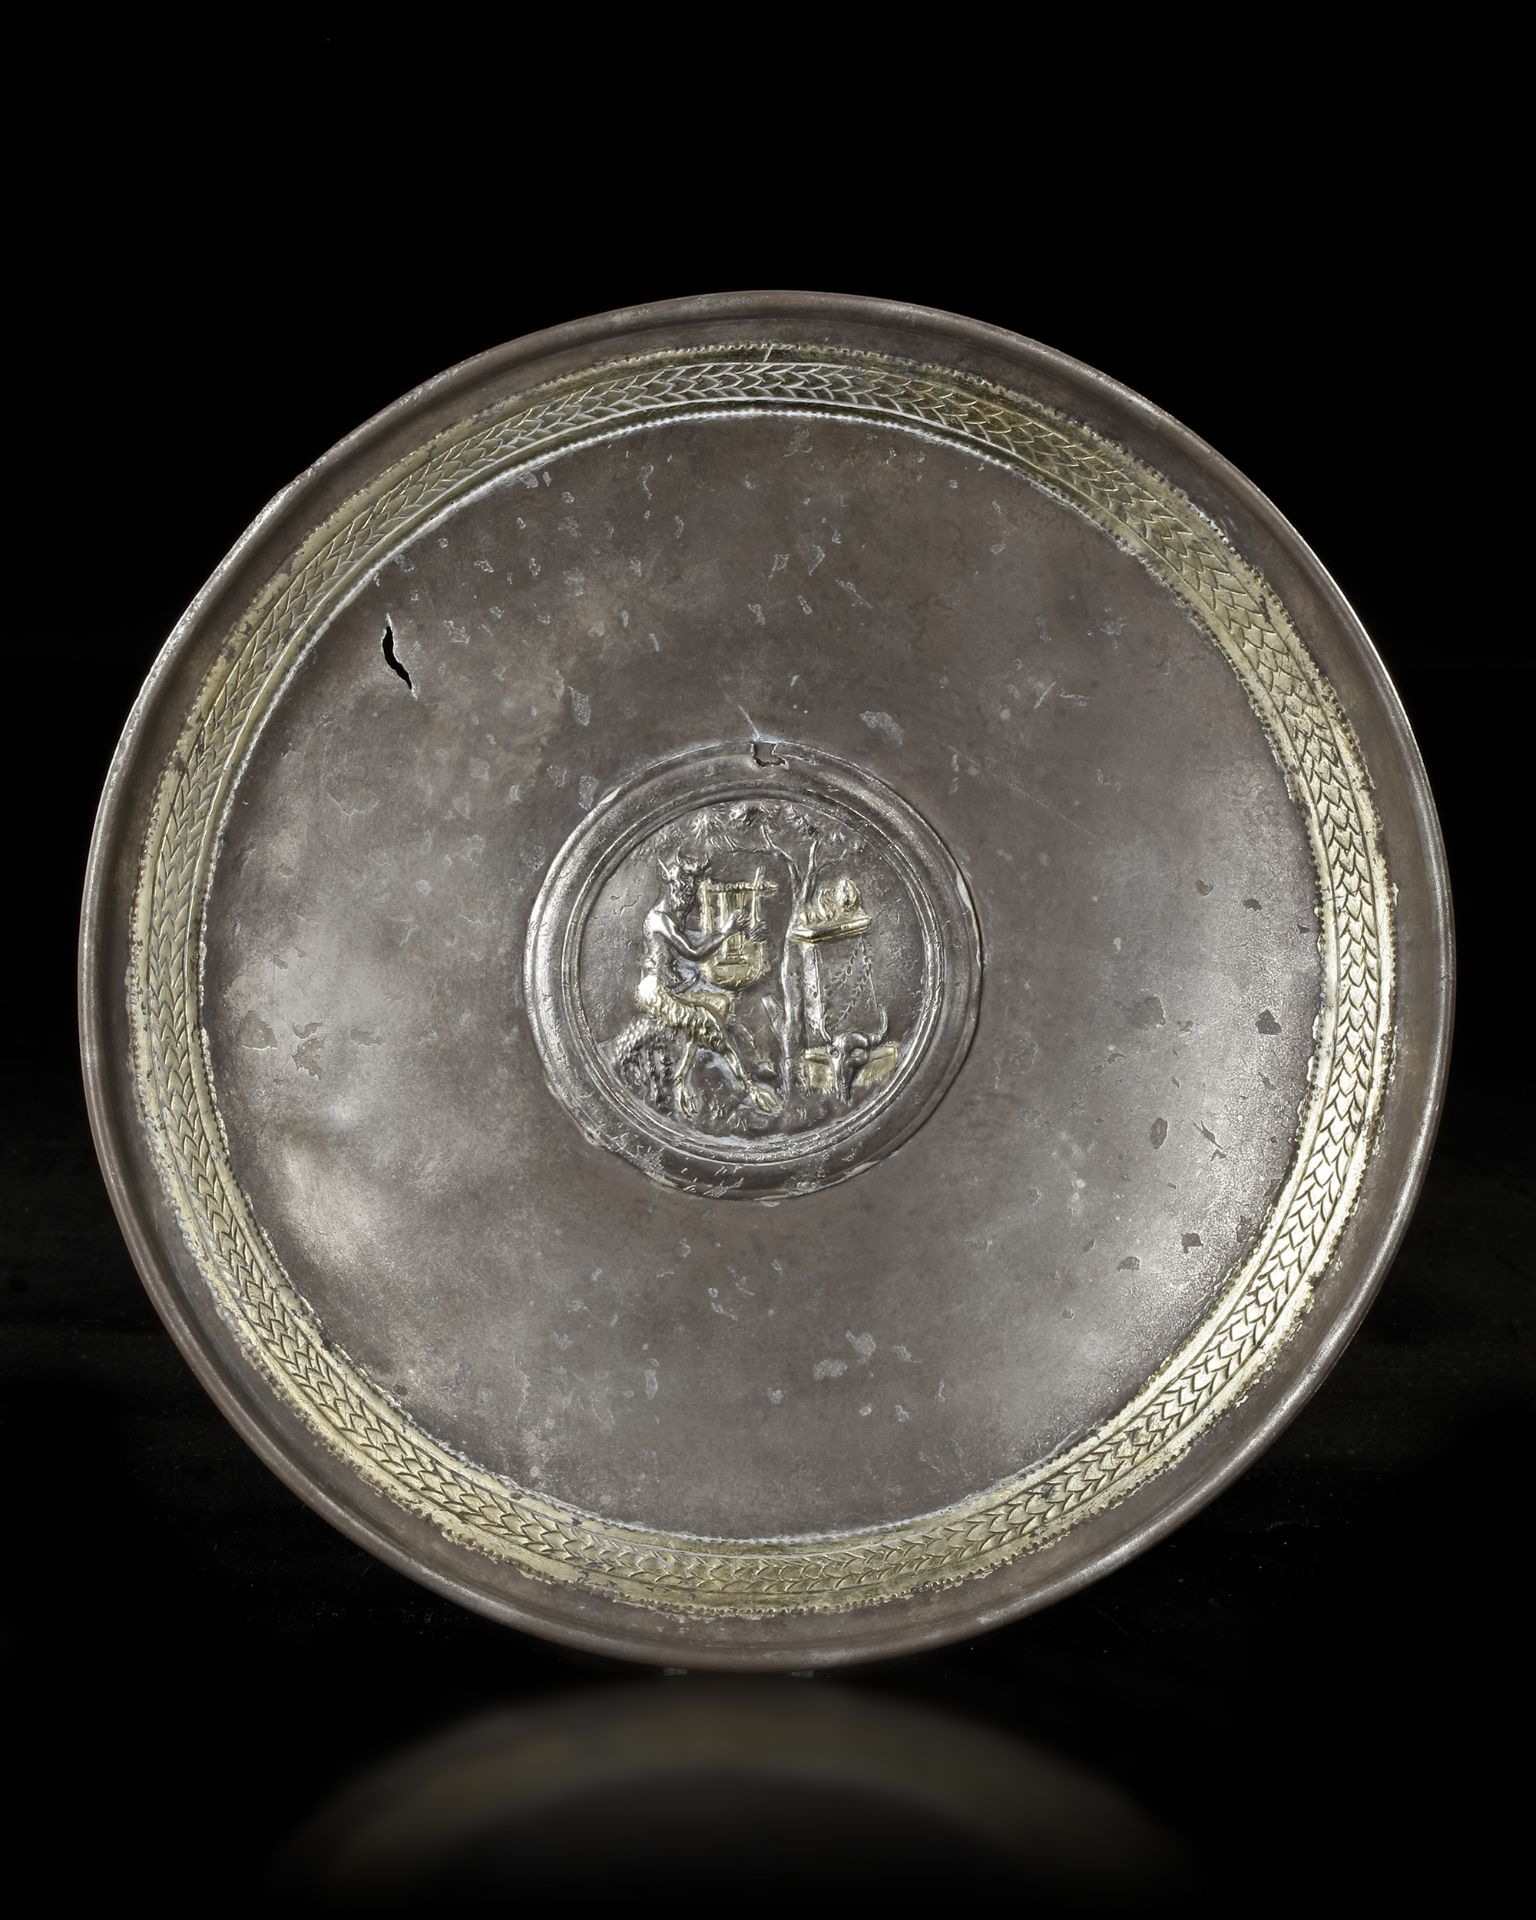 A CHARMING LATE ROMAN SILVER PLATE, 4TH CENTURY AD